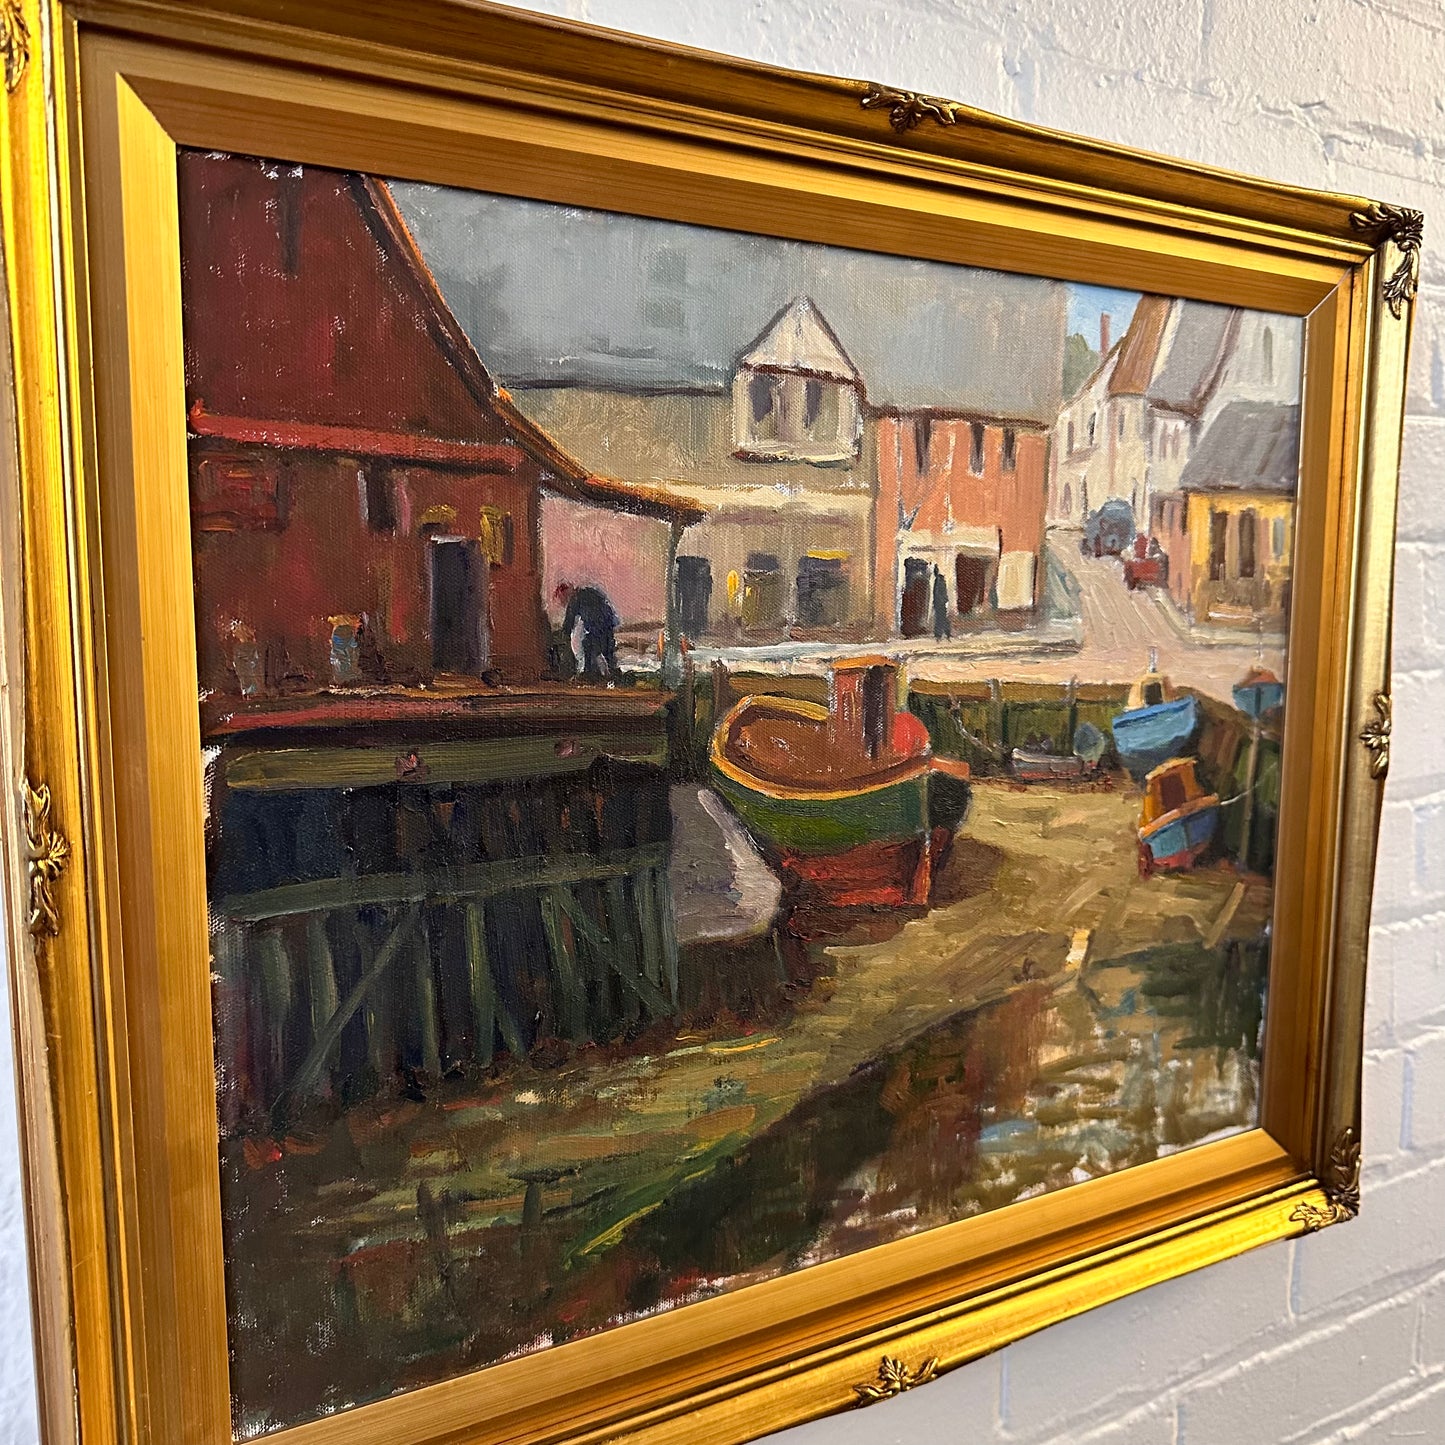 FRAMED PORT PAINTING BY RONALD SEAGER